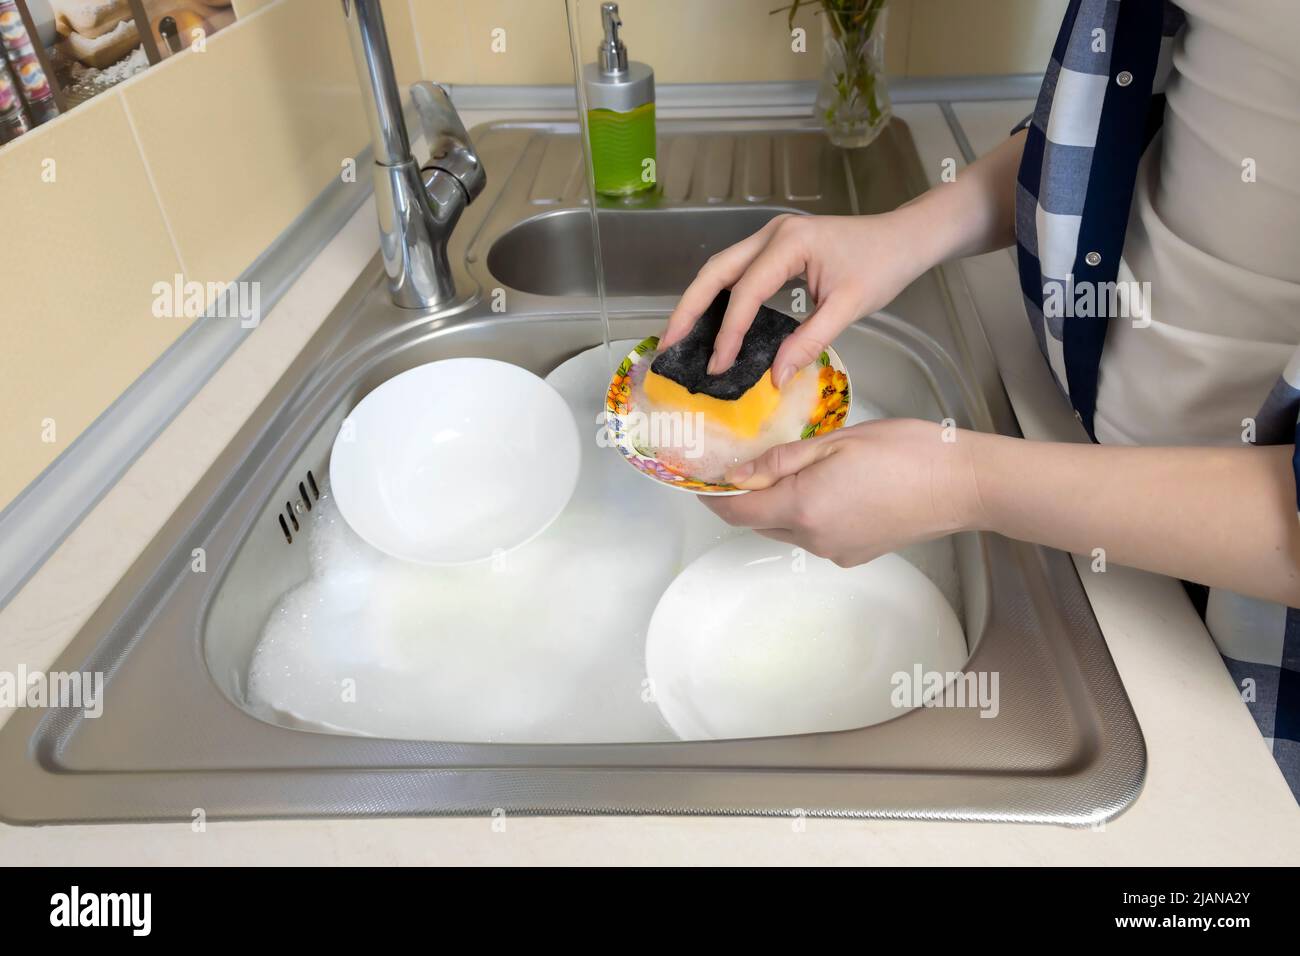 Girl washes a lot of dirty dishes in the kitchen sink. Stock Photo